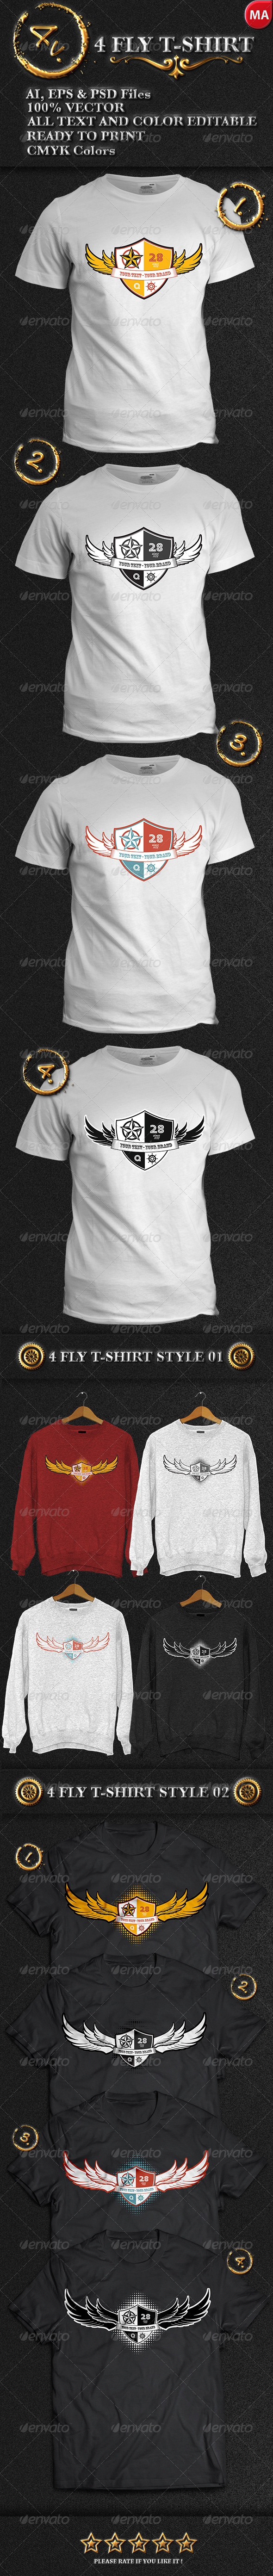 GraphicRiver 4 Fly T-Shirt 7665600